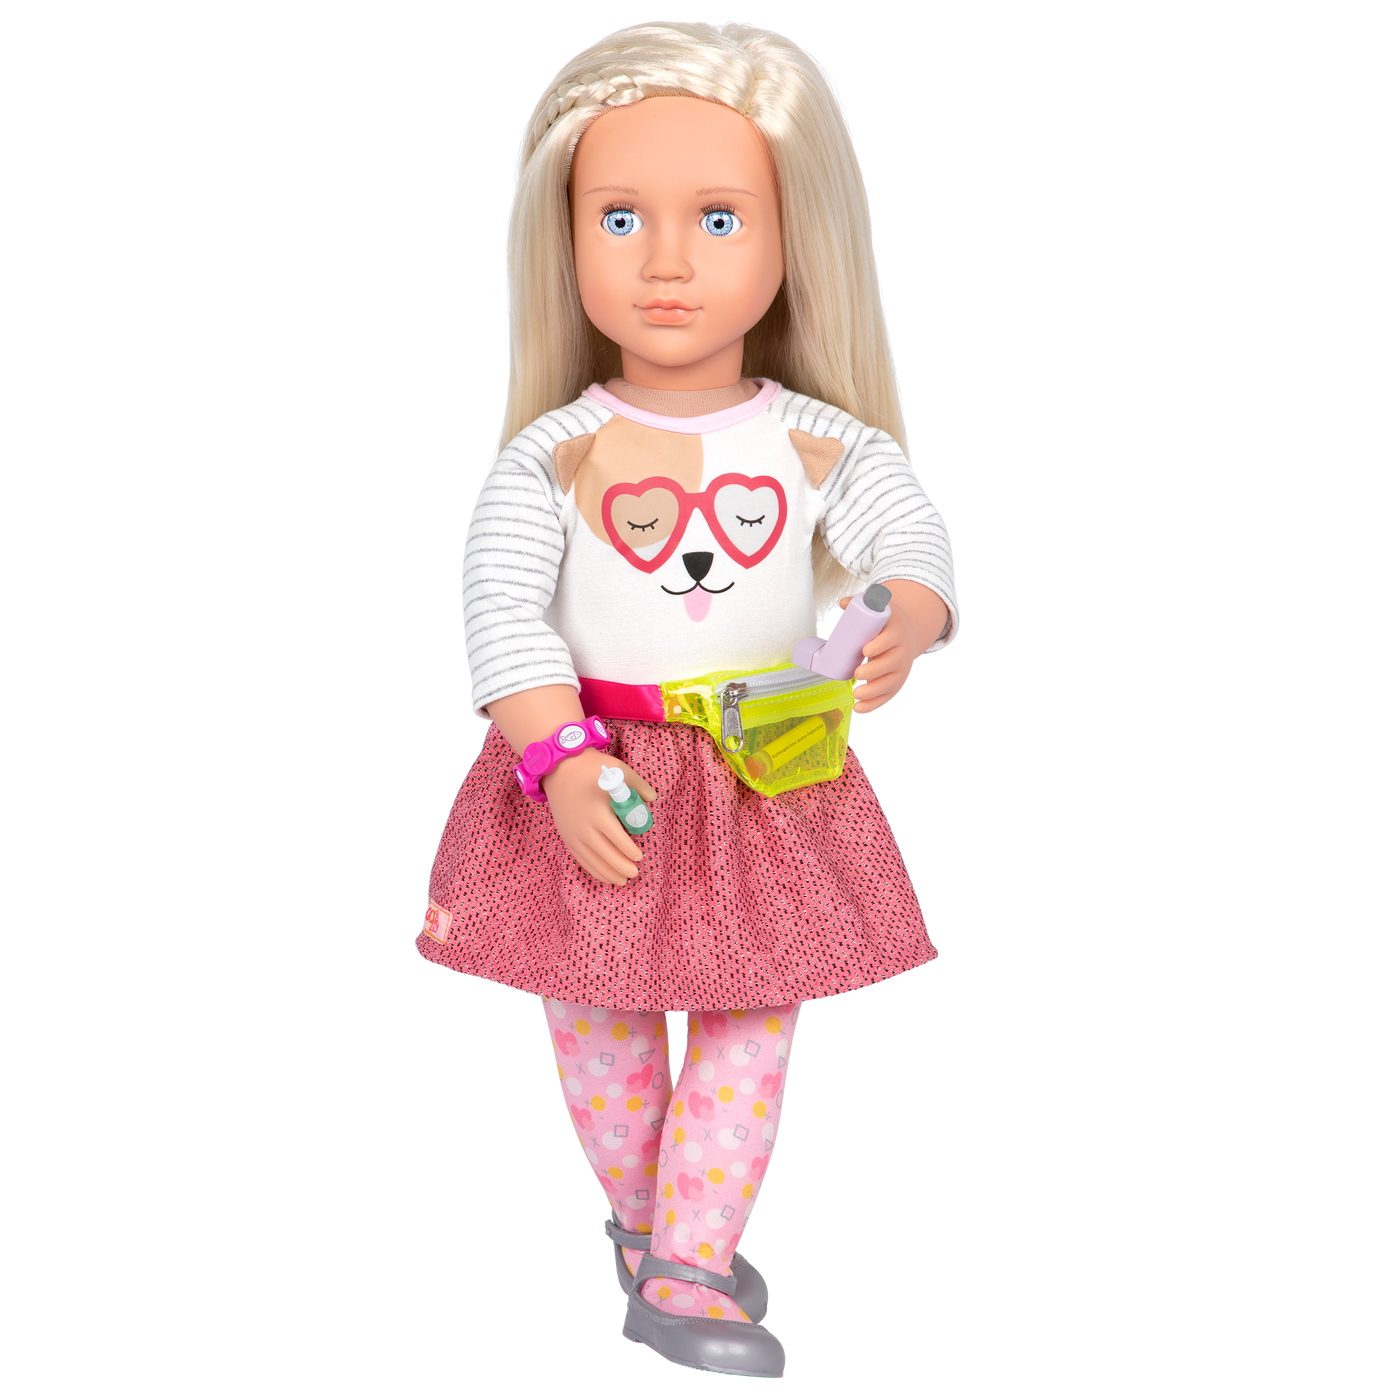 18-inch doll with allergy and asthma playset